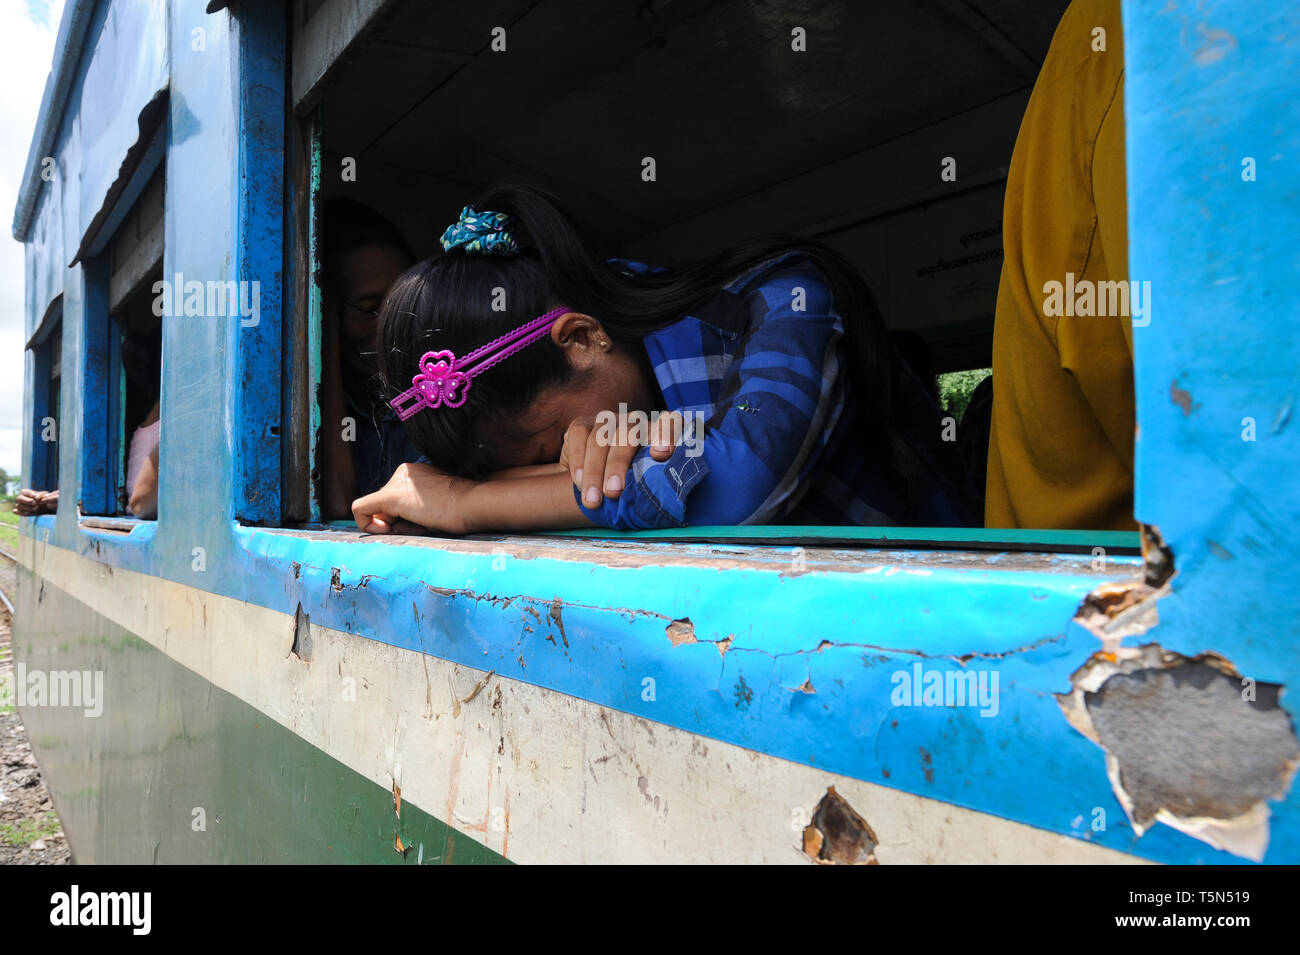 02.09.2013, Yangon, Republic of the Union of Myanmar, Asia - A girl is resting next to an open window inside a train compartment of the Circle Line. Stock Photo